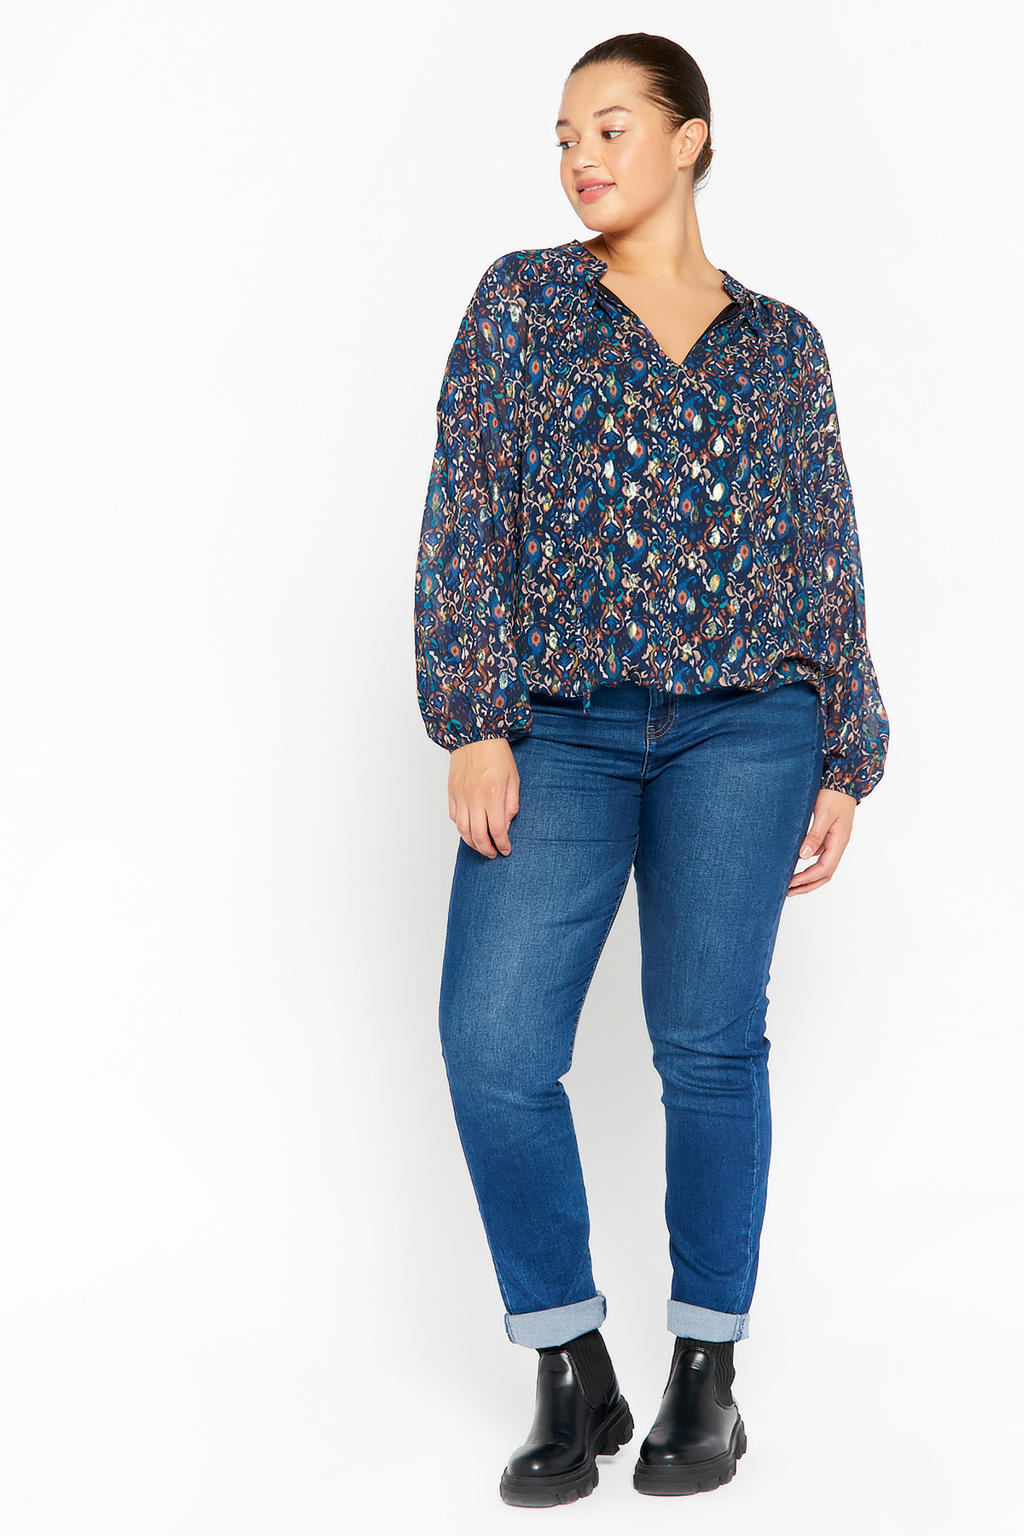 LOLALIZA top met all over print donkerblauw